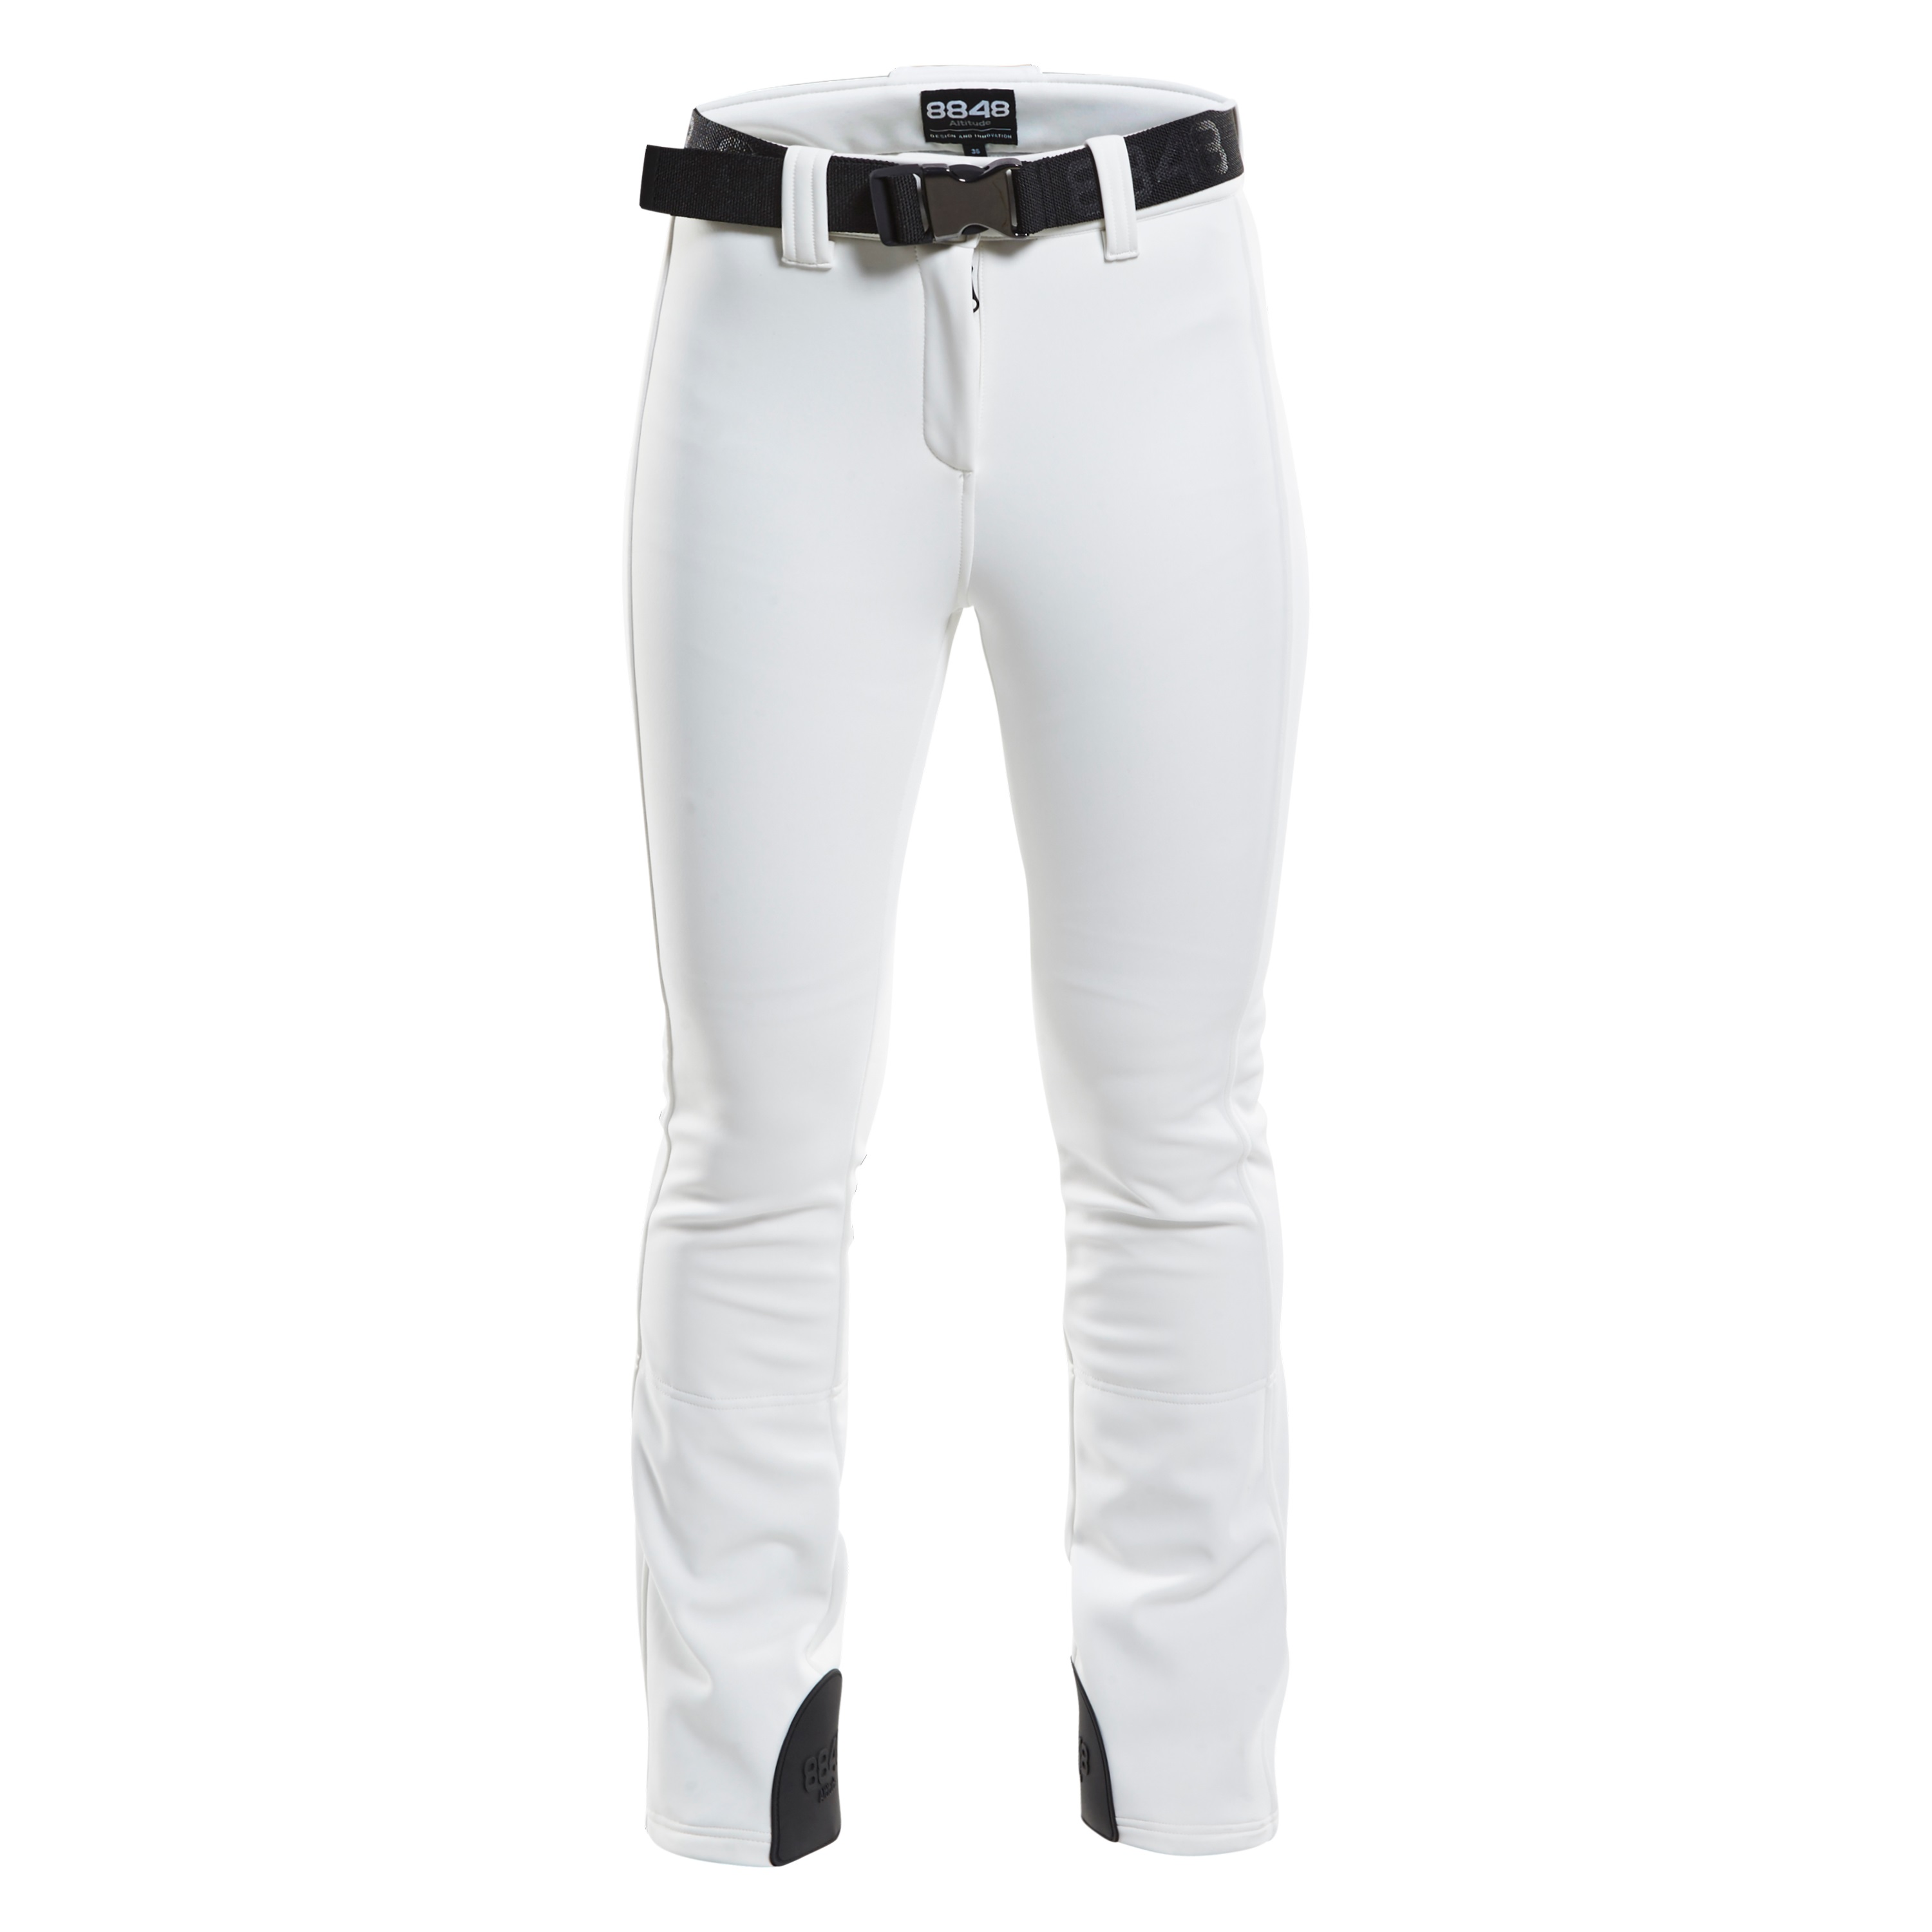 8848 Altitude Rothorn Pant, Buy here online